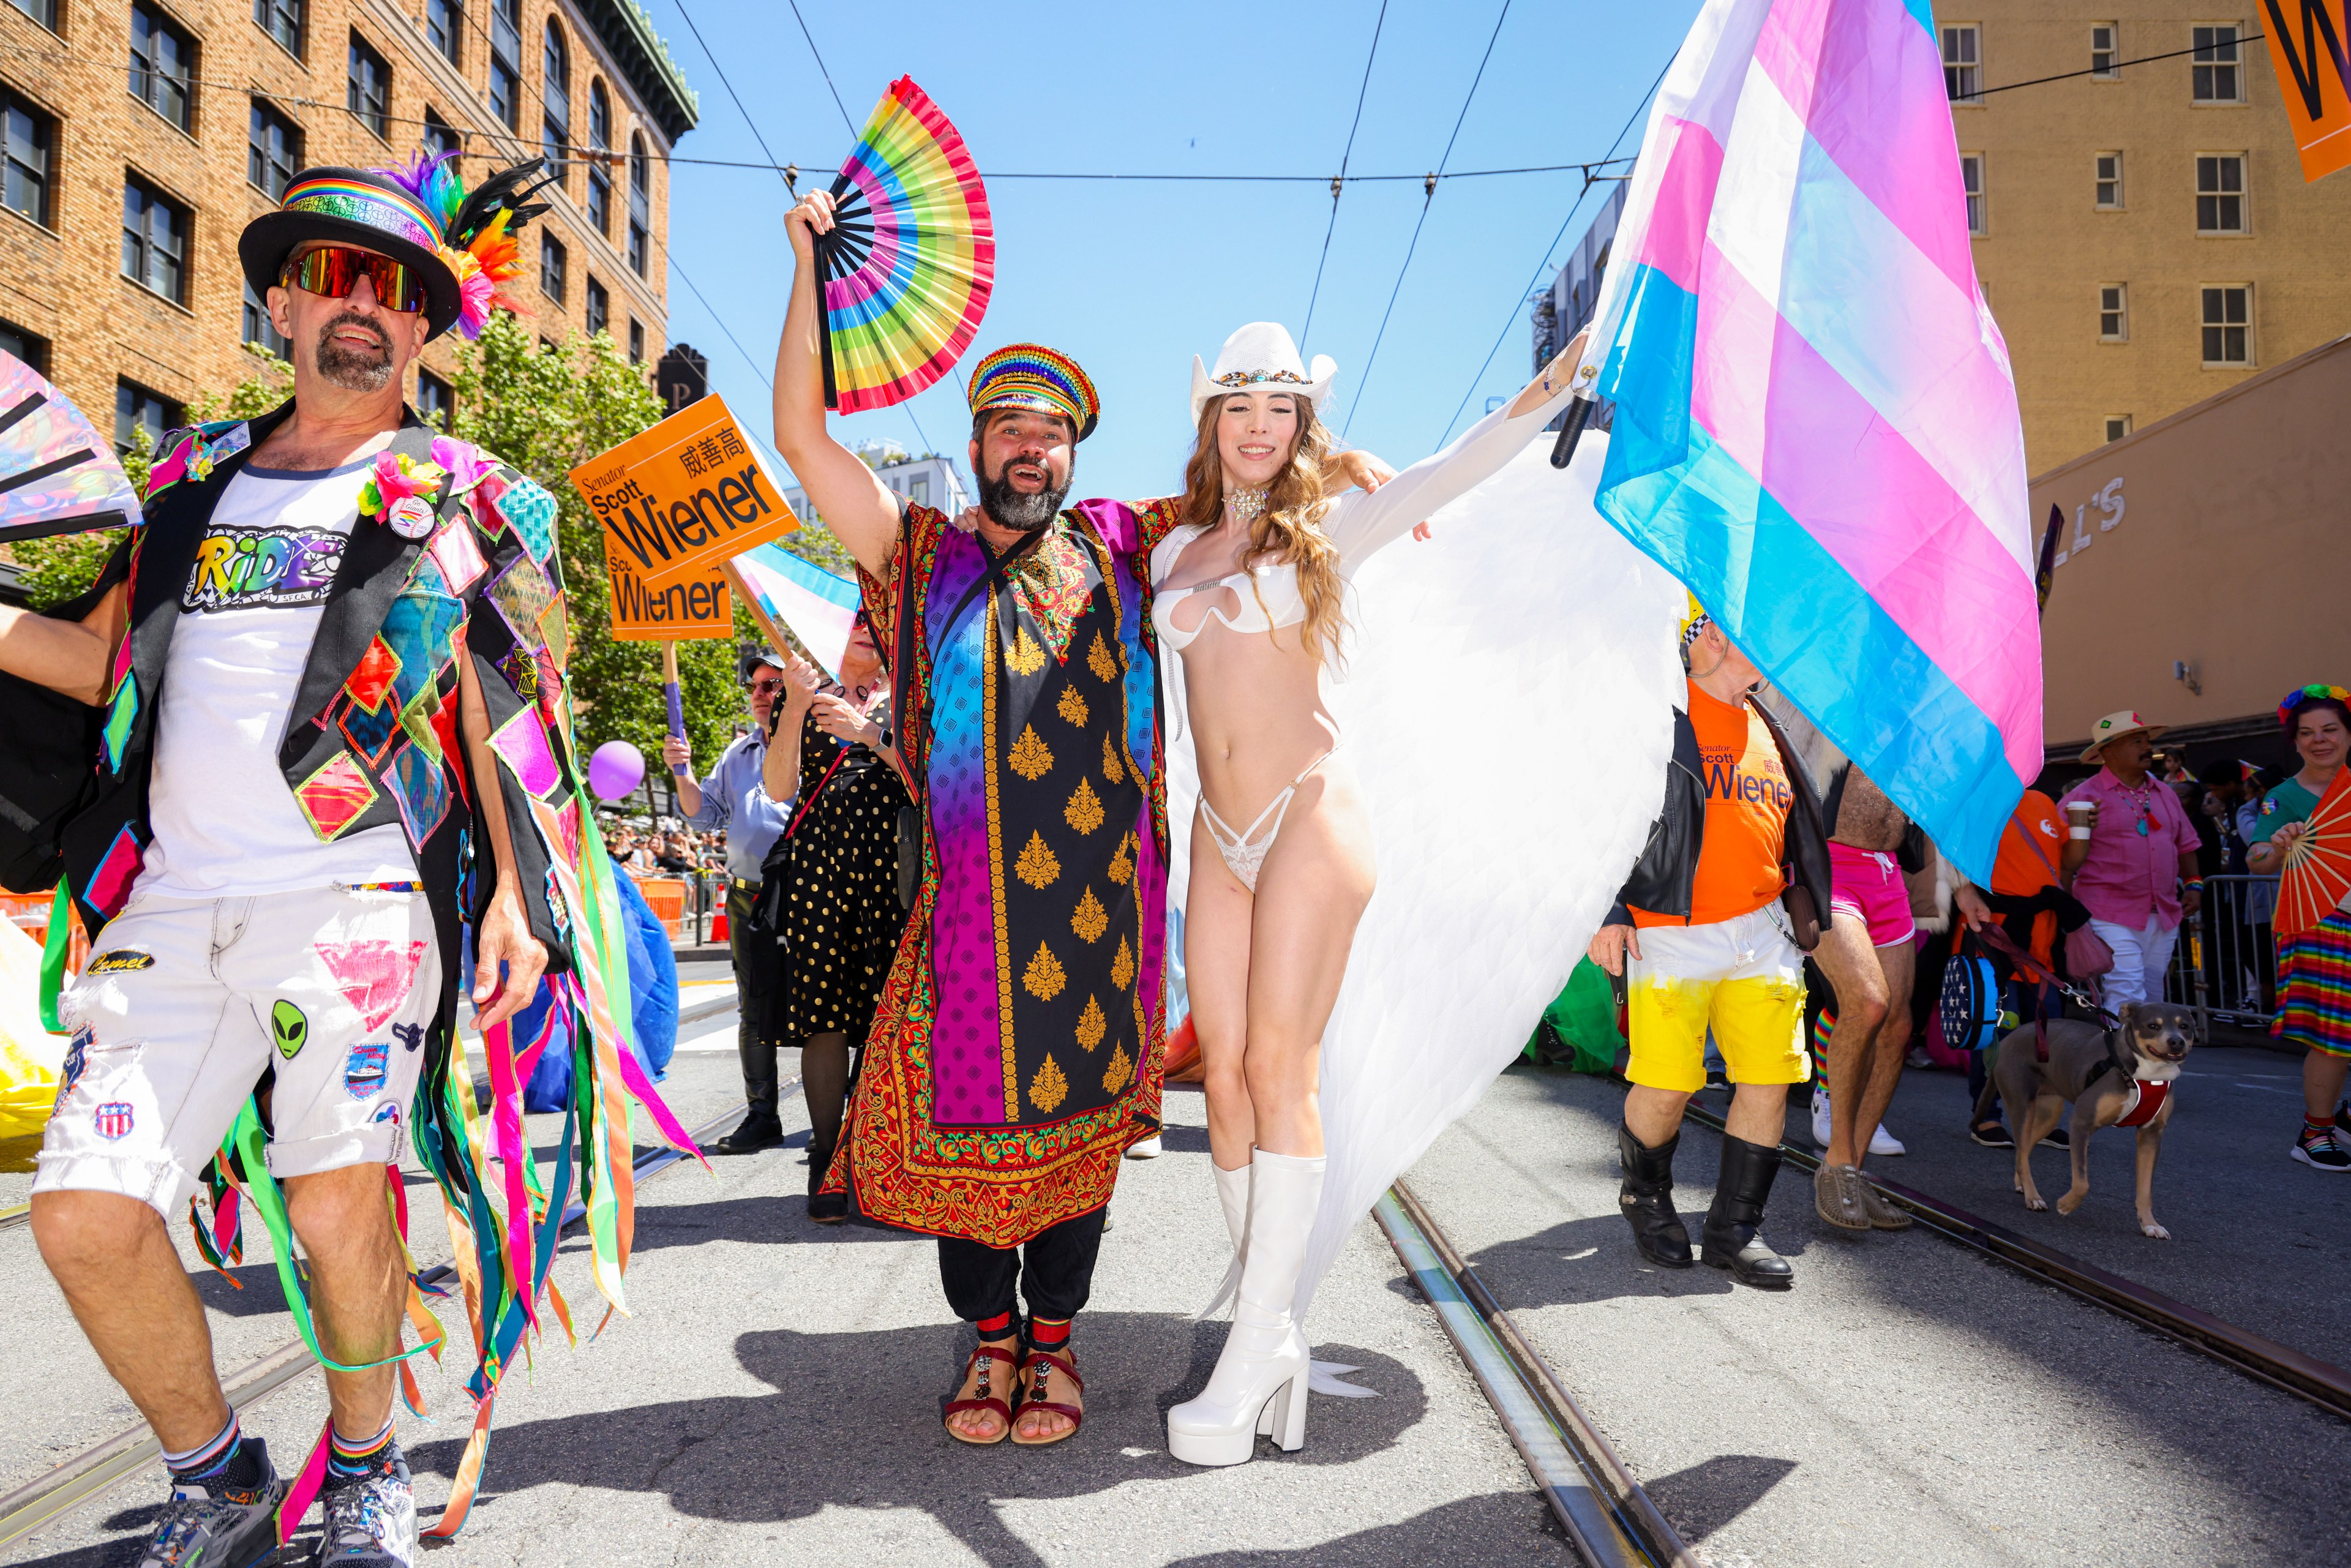 A colorful parade with people in vibrant costumes; one person wears black and white with rainbow fans, another wears a patterned robe, and a third in white lingerie has angel wings.